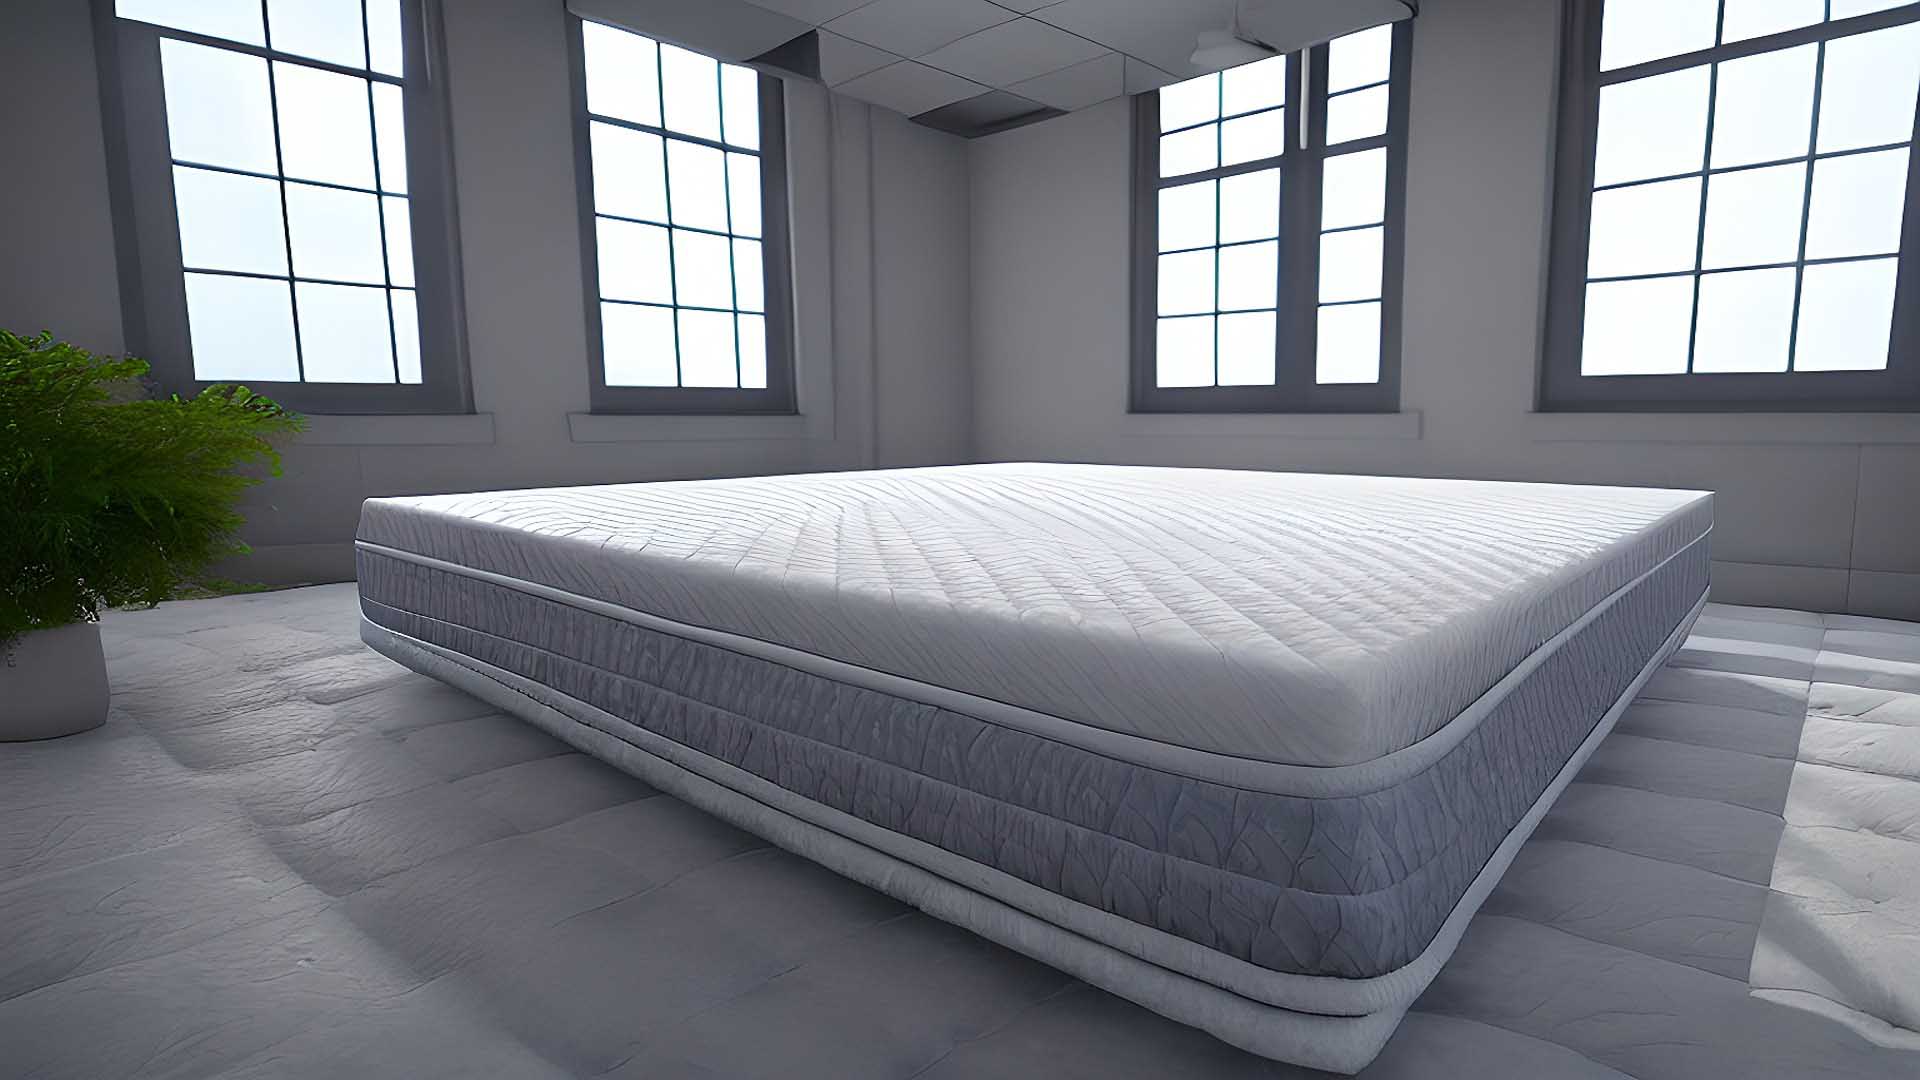 Affordable Mattress in Freeport, NY